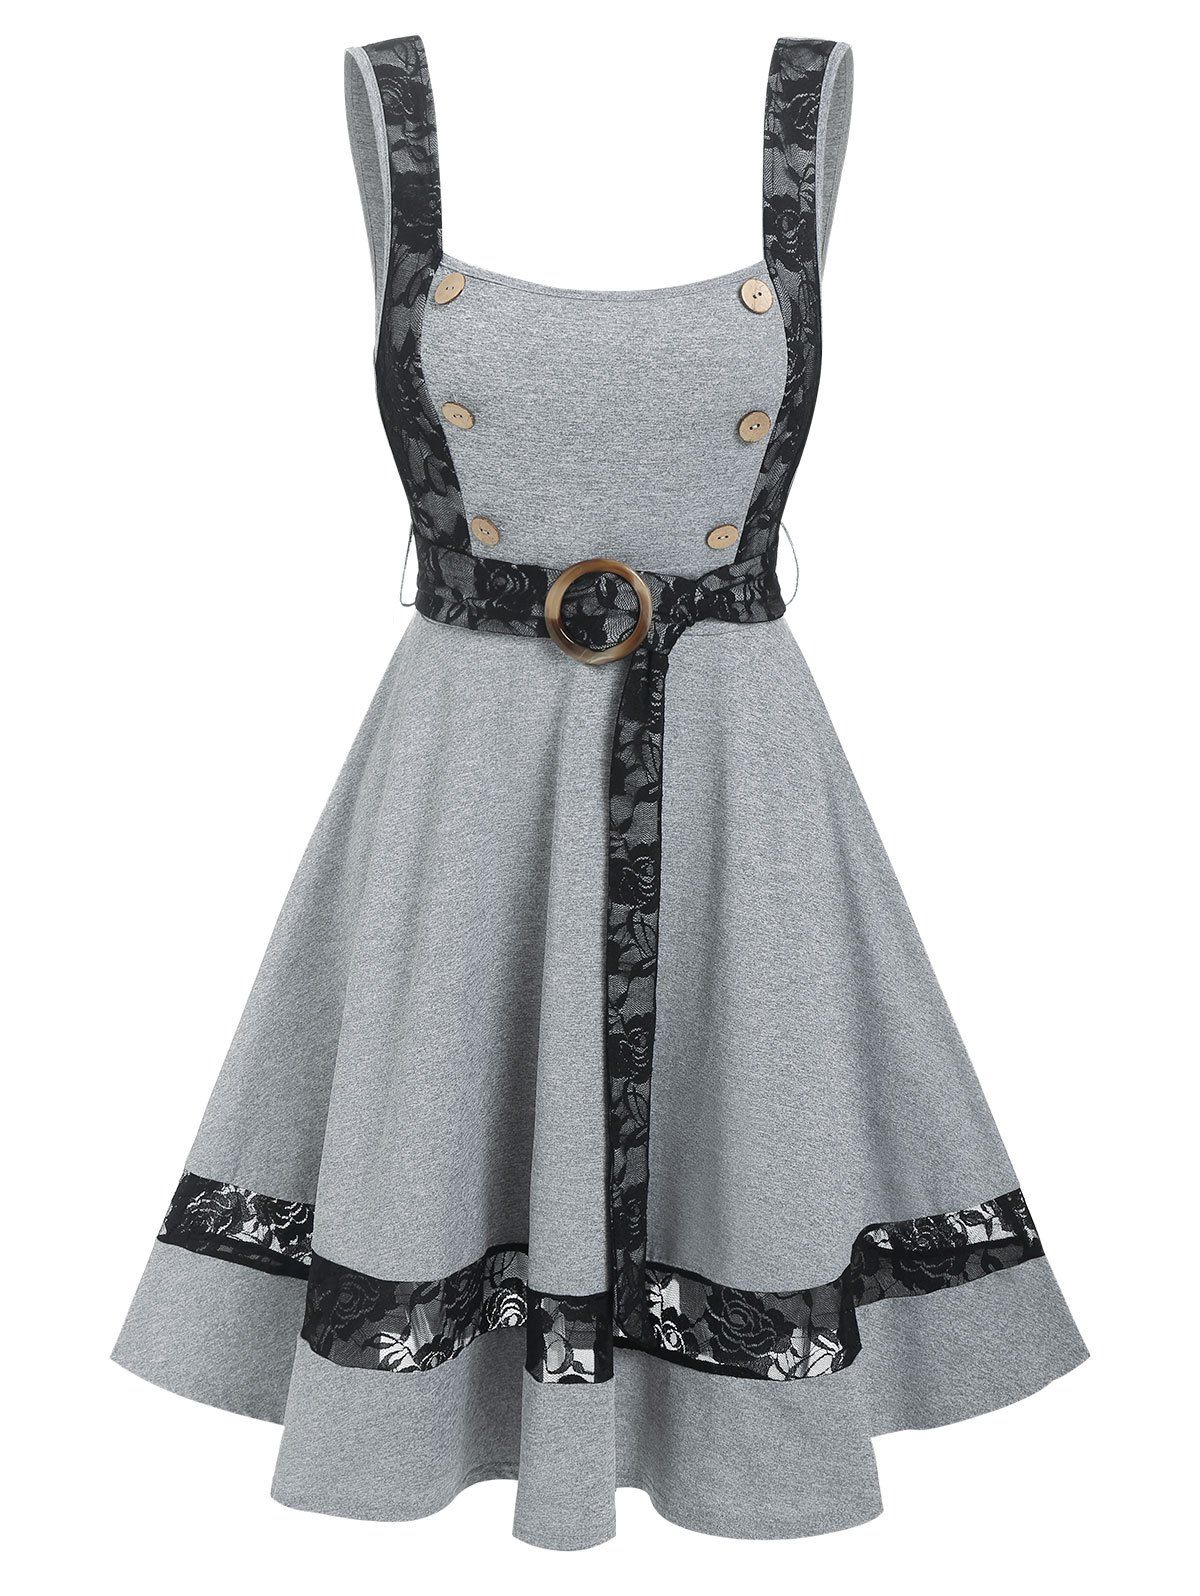 Floral Lace Insert Sailor Button Flare Summer O Ring Tank Dress - GRAY M